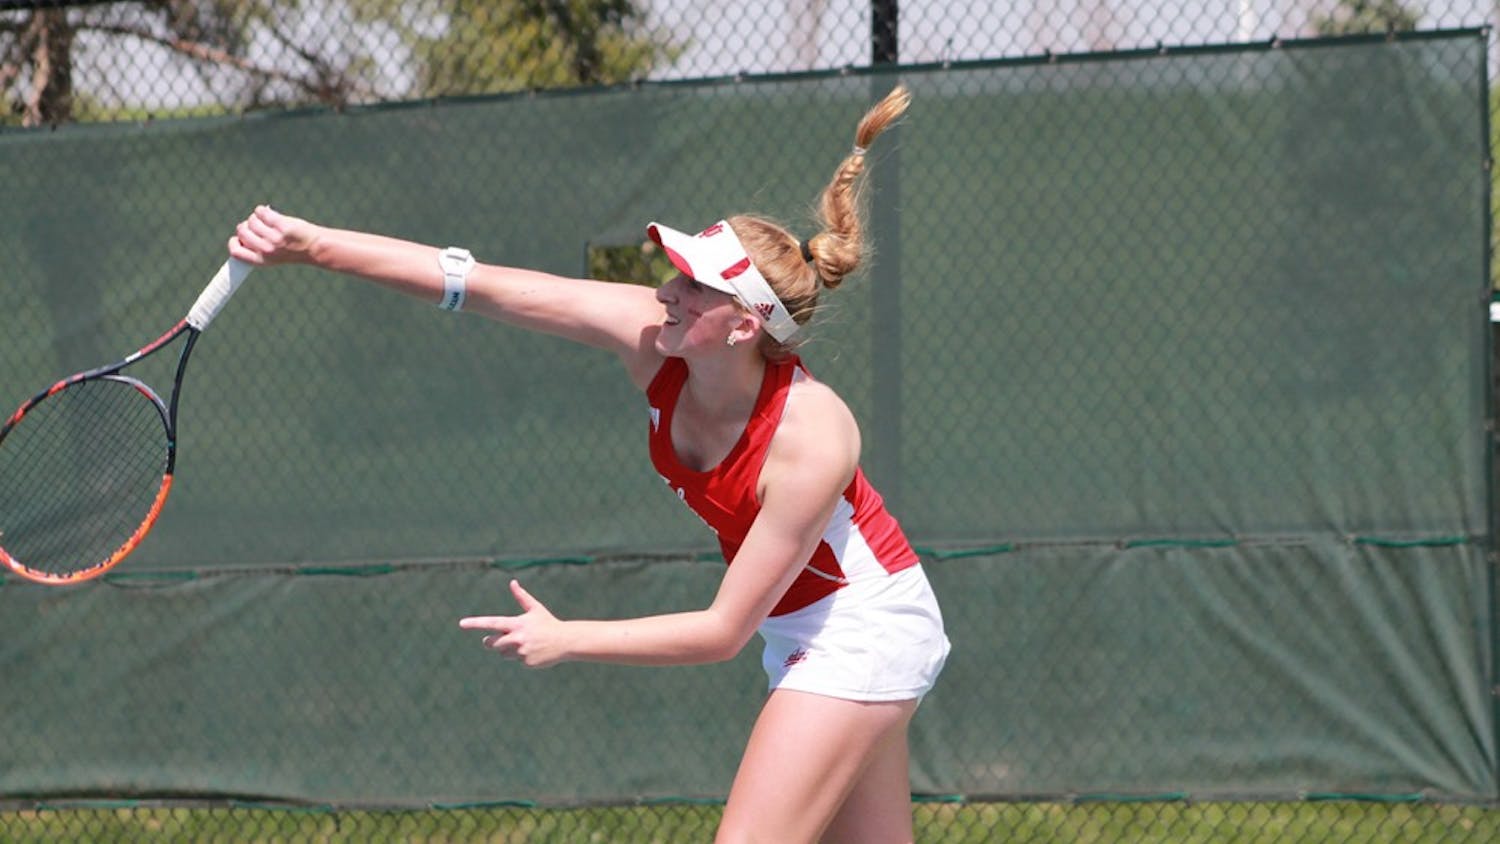 Senior Kim Schmider serves the ball in a singles match Sunday morning. IU took on Northwestern in their final home match of the season.